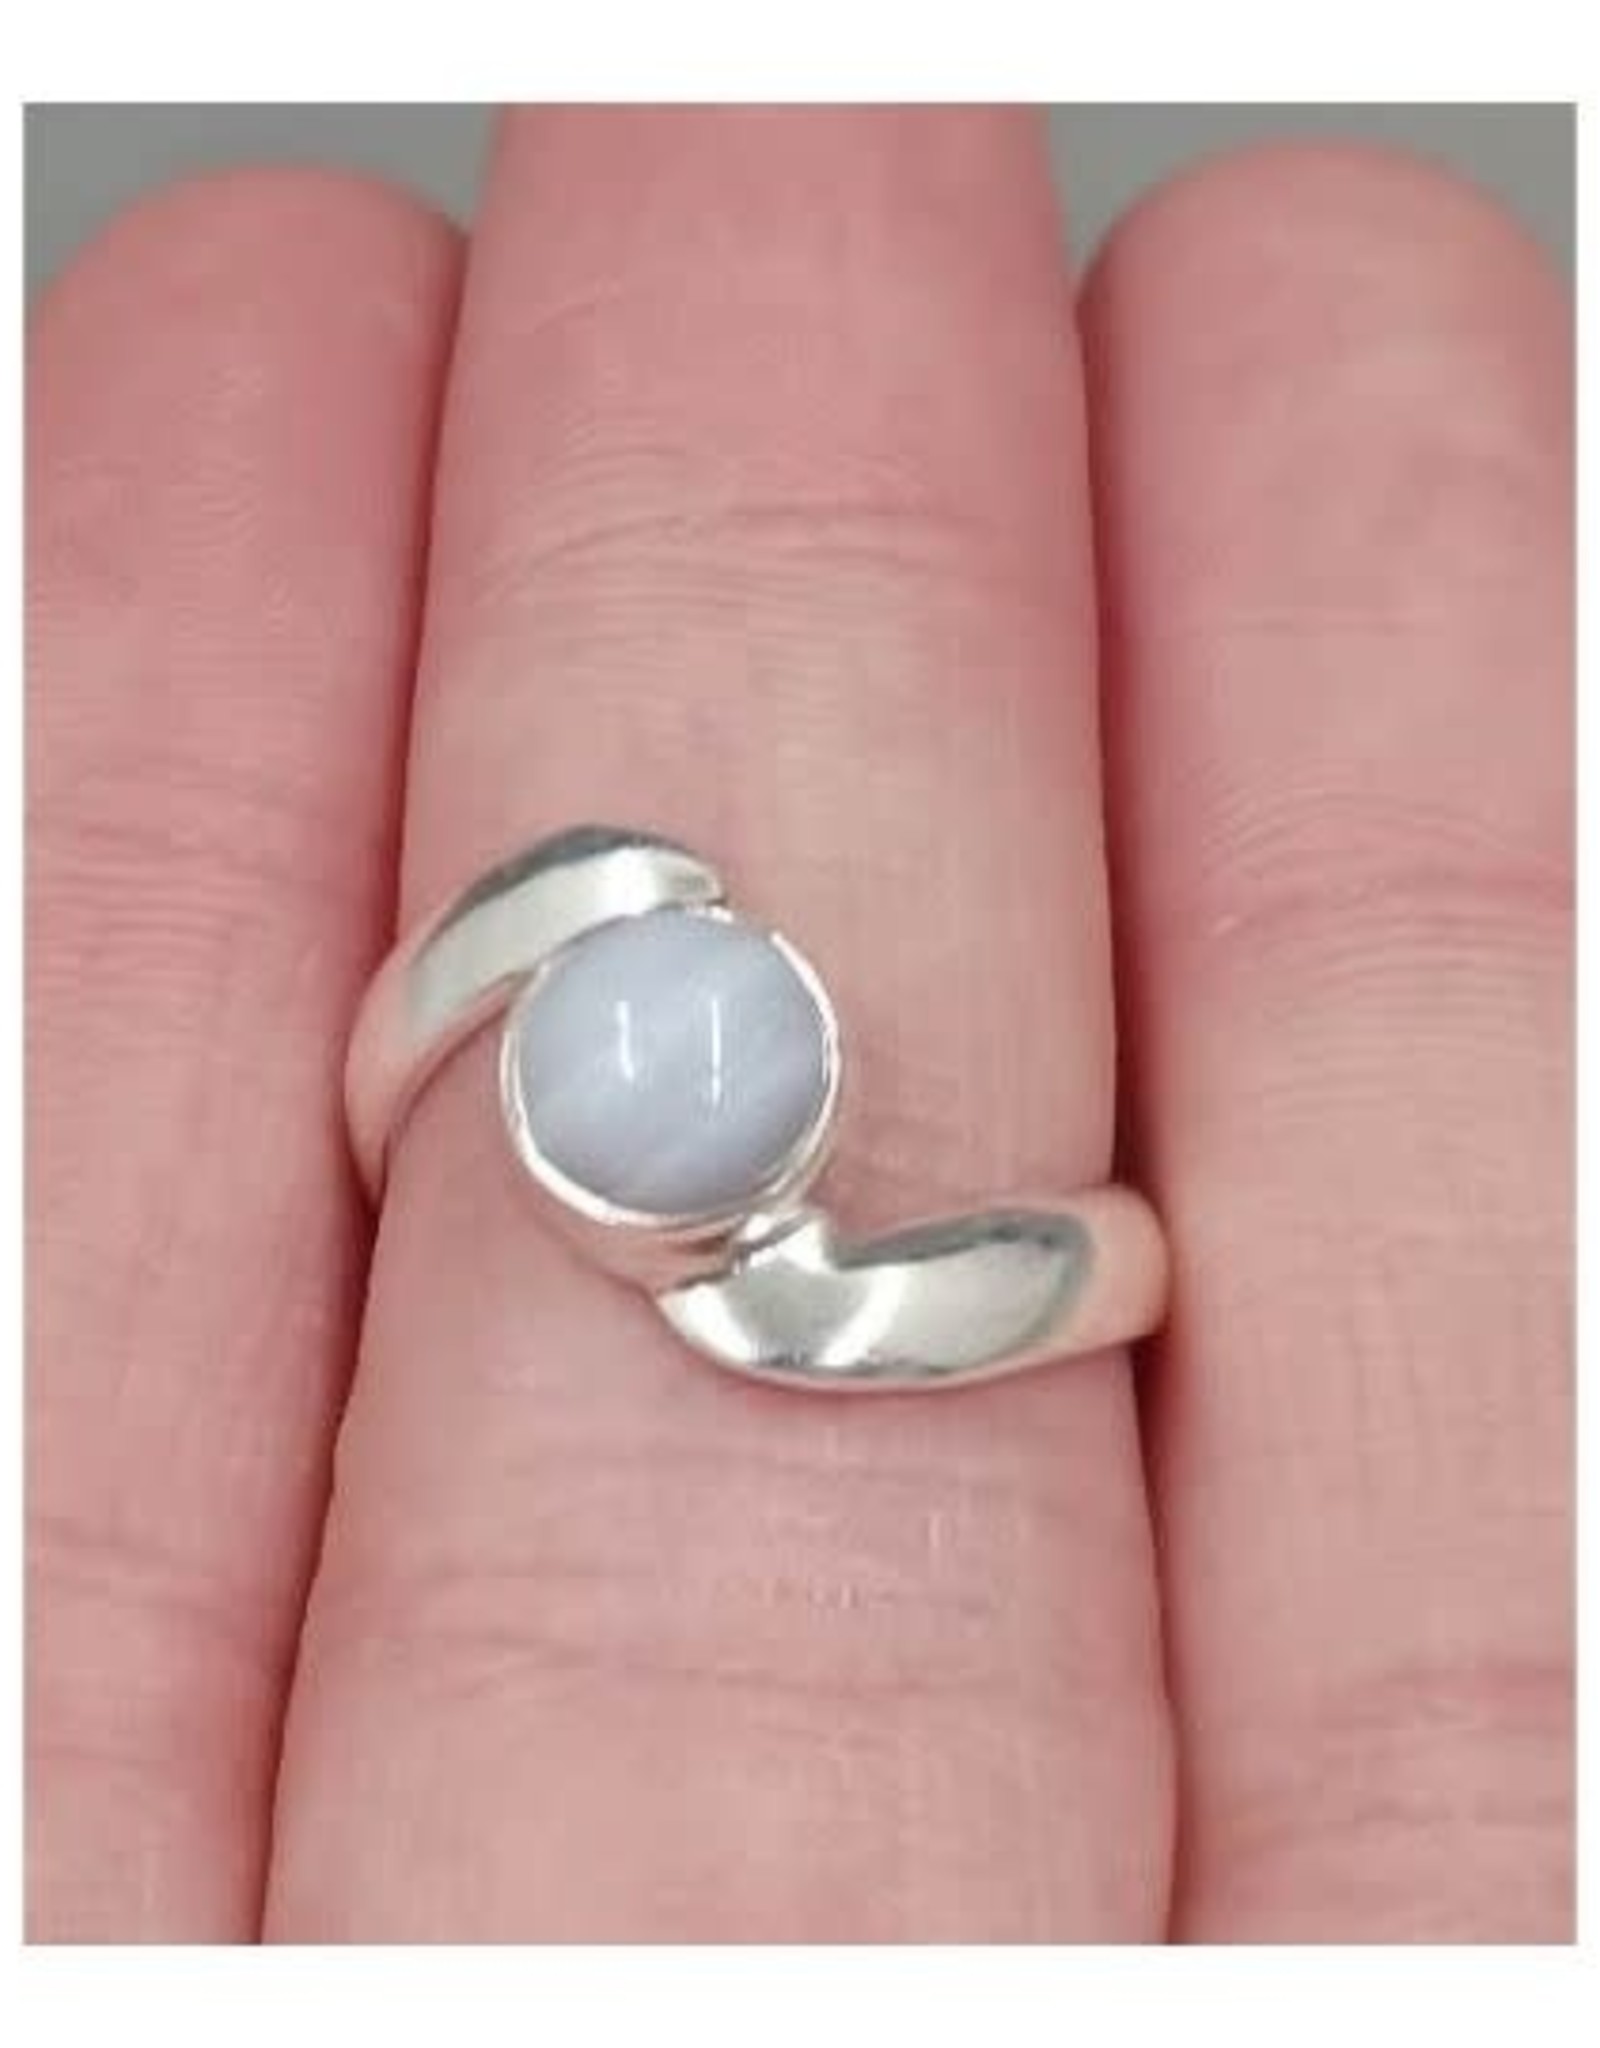 Blue Lace Agate Ring - Size 7 Sterling Silver